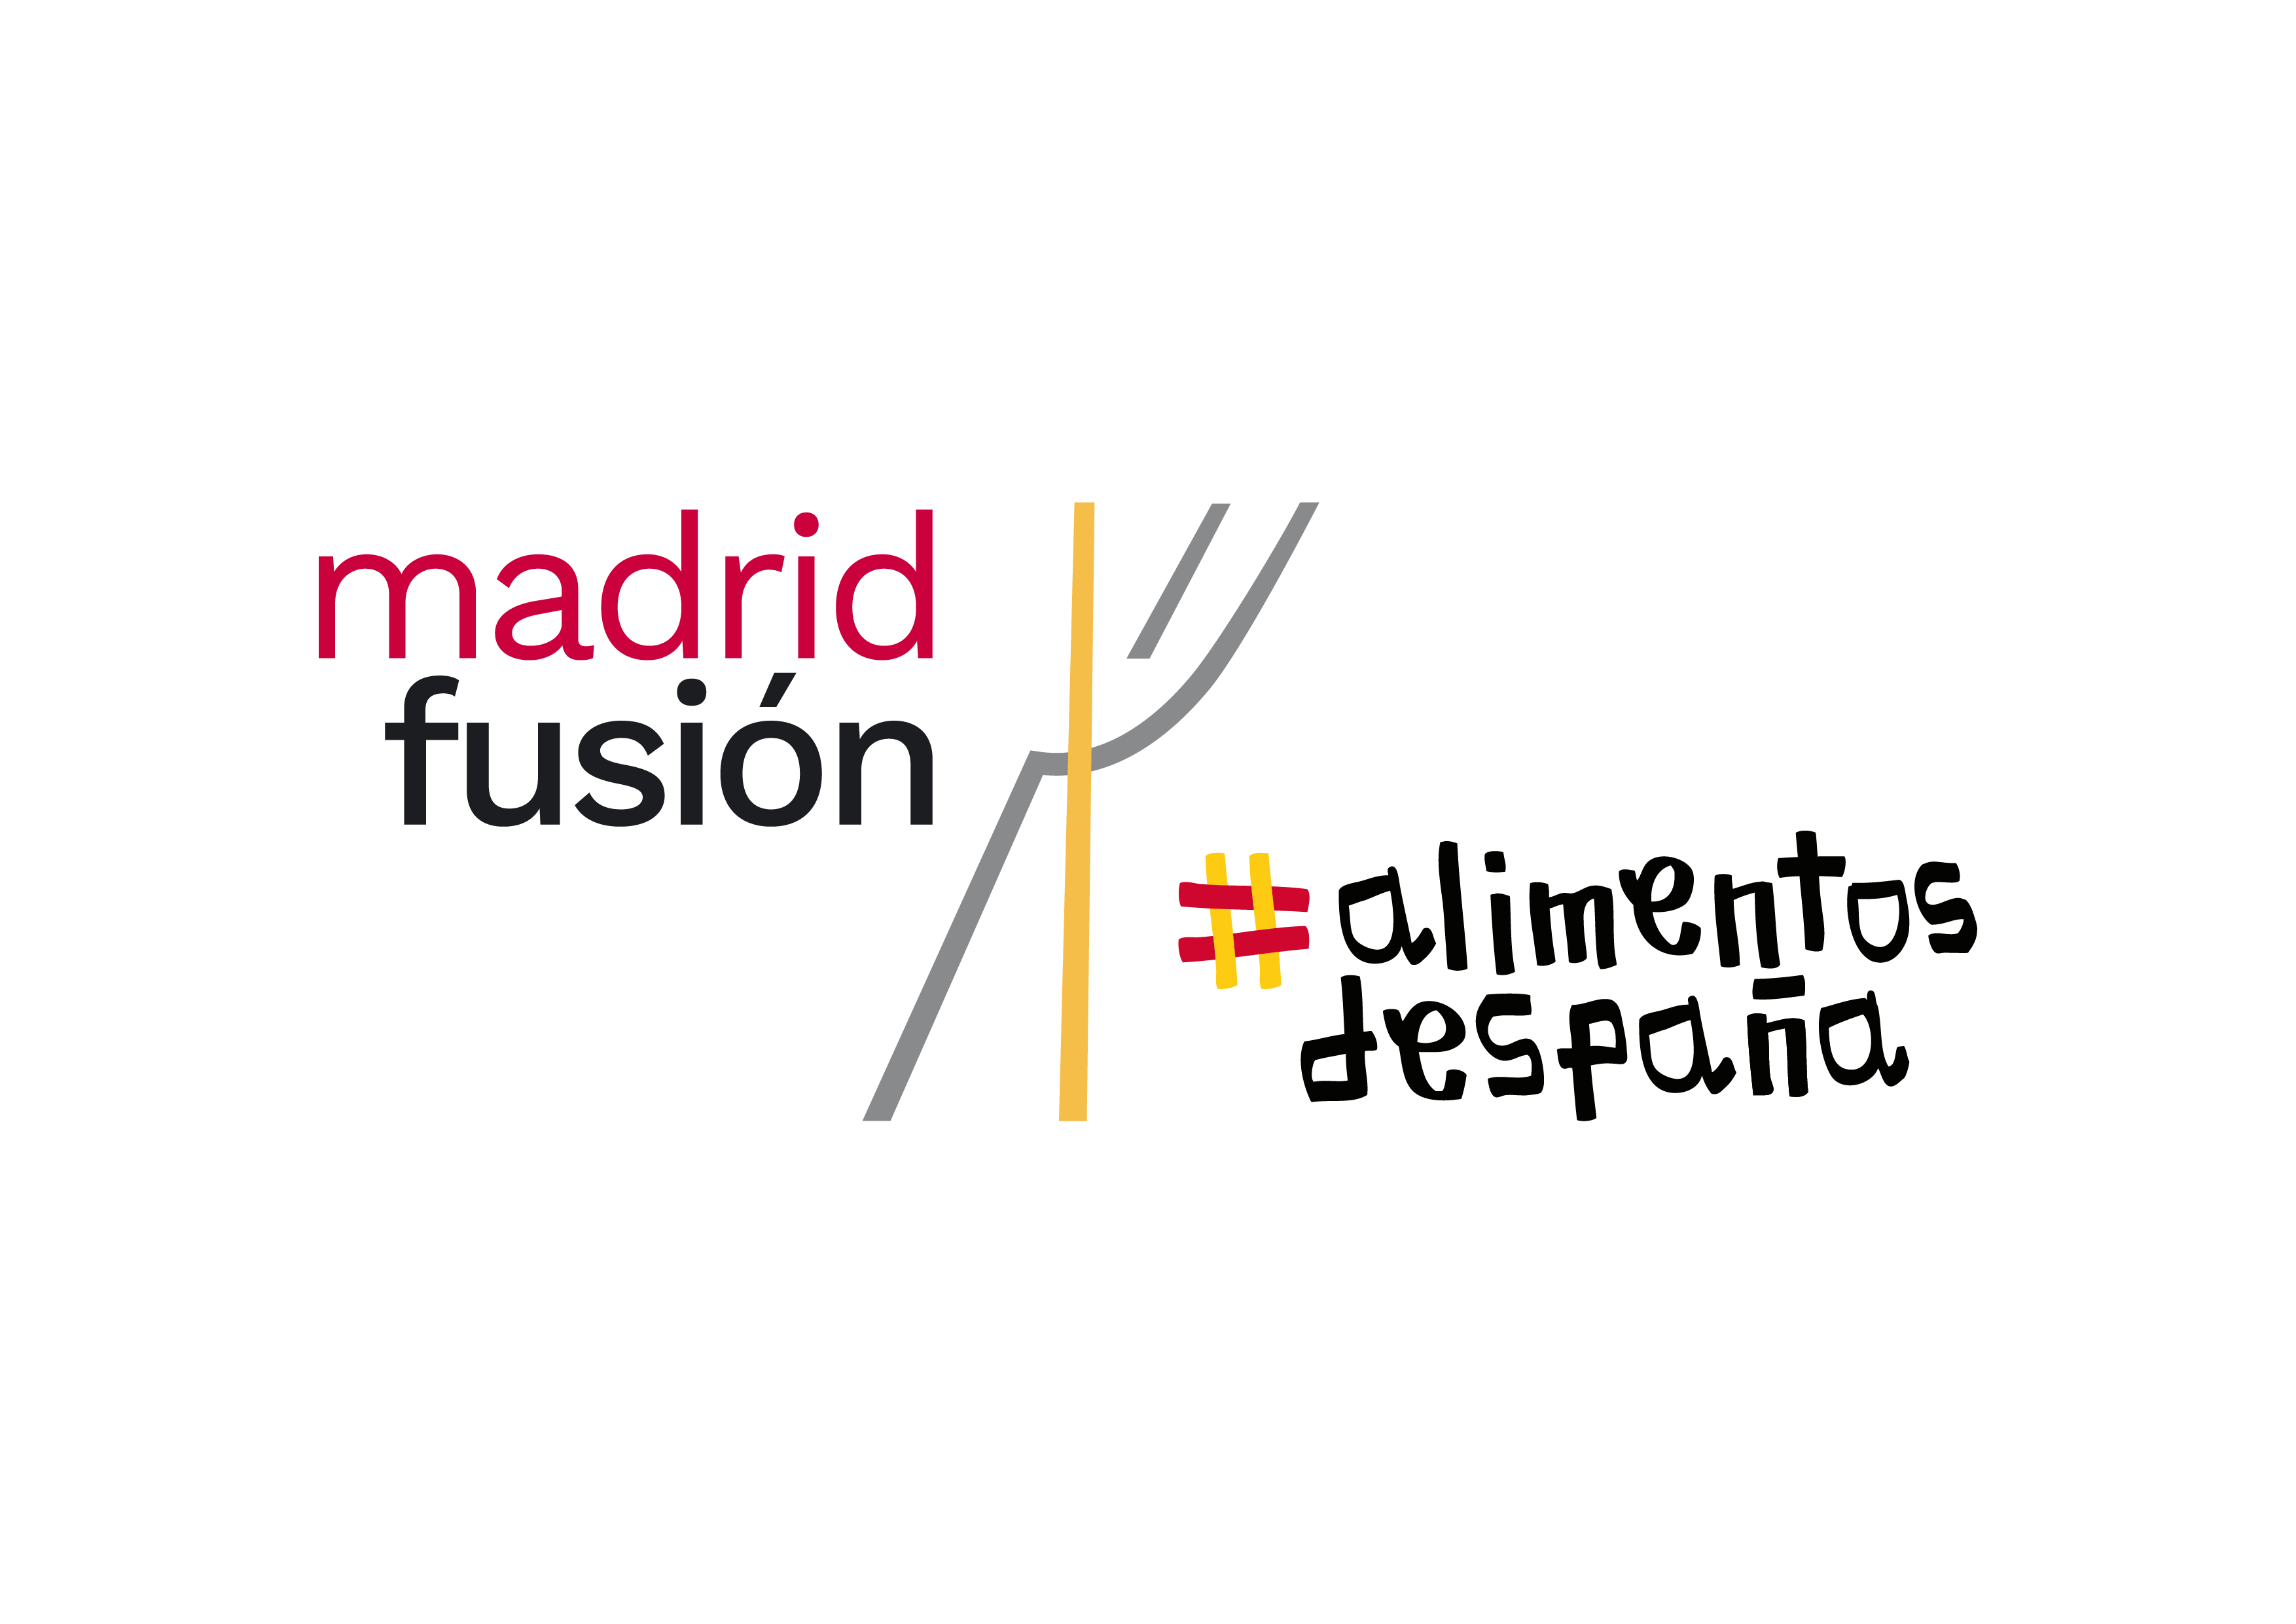 Image of MADRID FUSION LOGO 2021 ALIM ENTOS DE ESPAÑA CMYK 01 in Silestone® awards the “Chef of the Year” to eight renowned chefs at 2021 Madrid Fusion - Cosentino